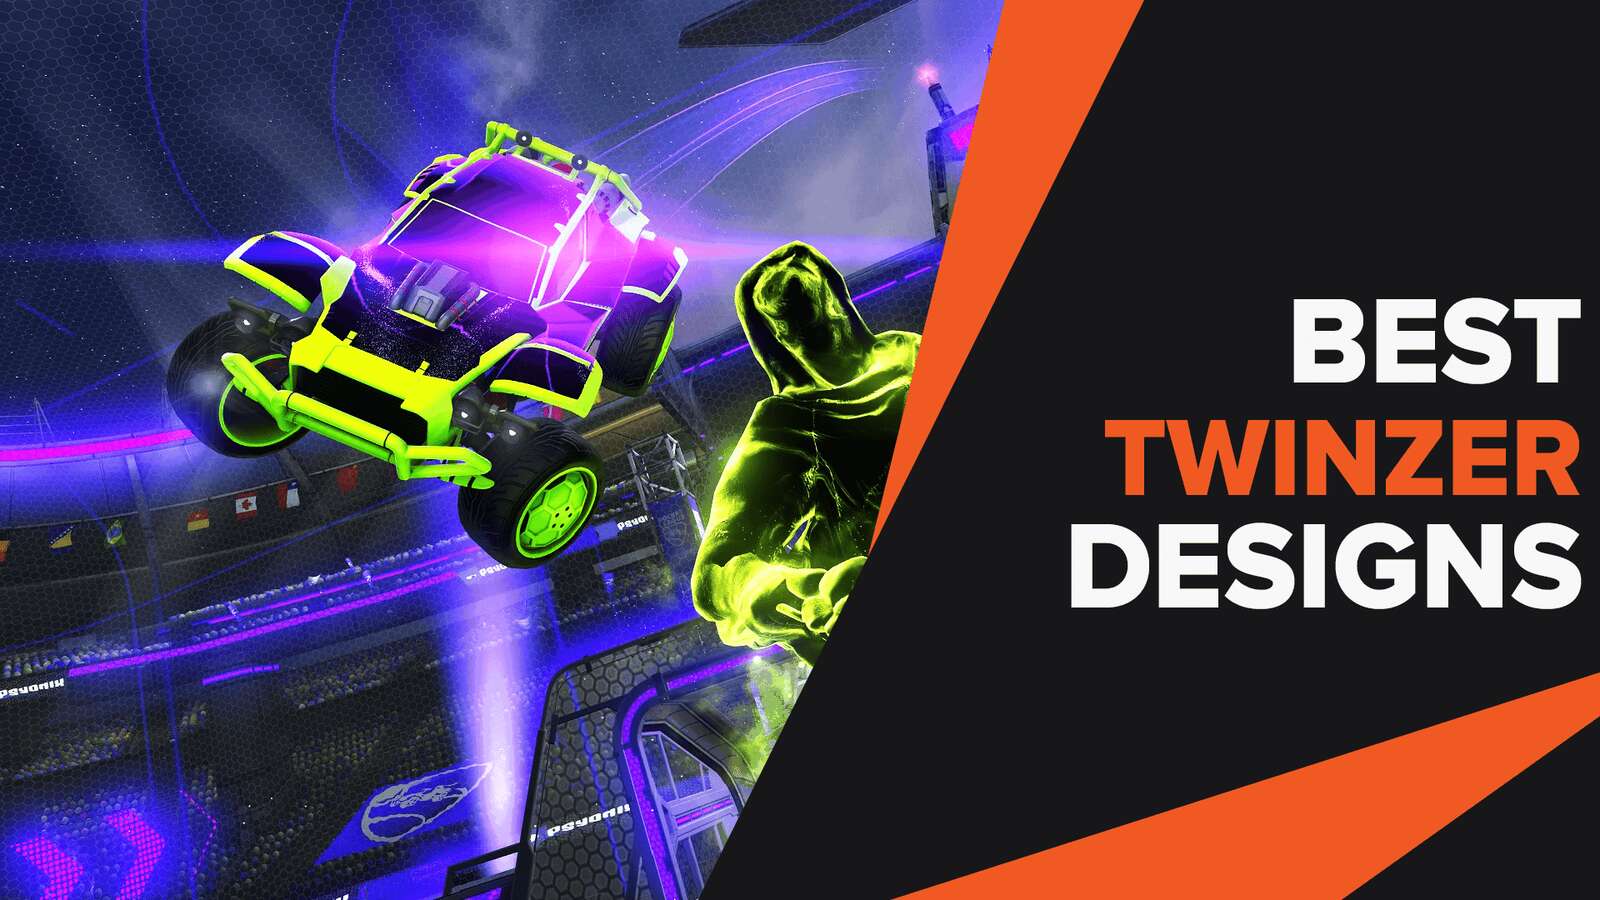 Best Twinzer Designs That Will Make Everyone Envious in Rocket League